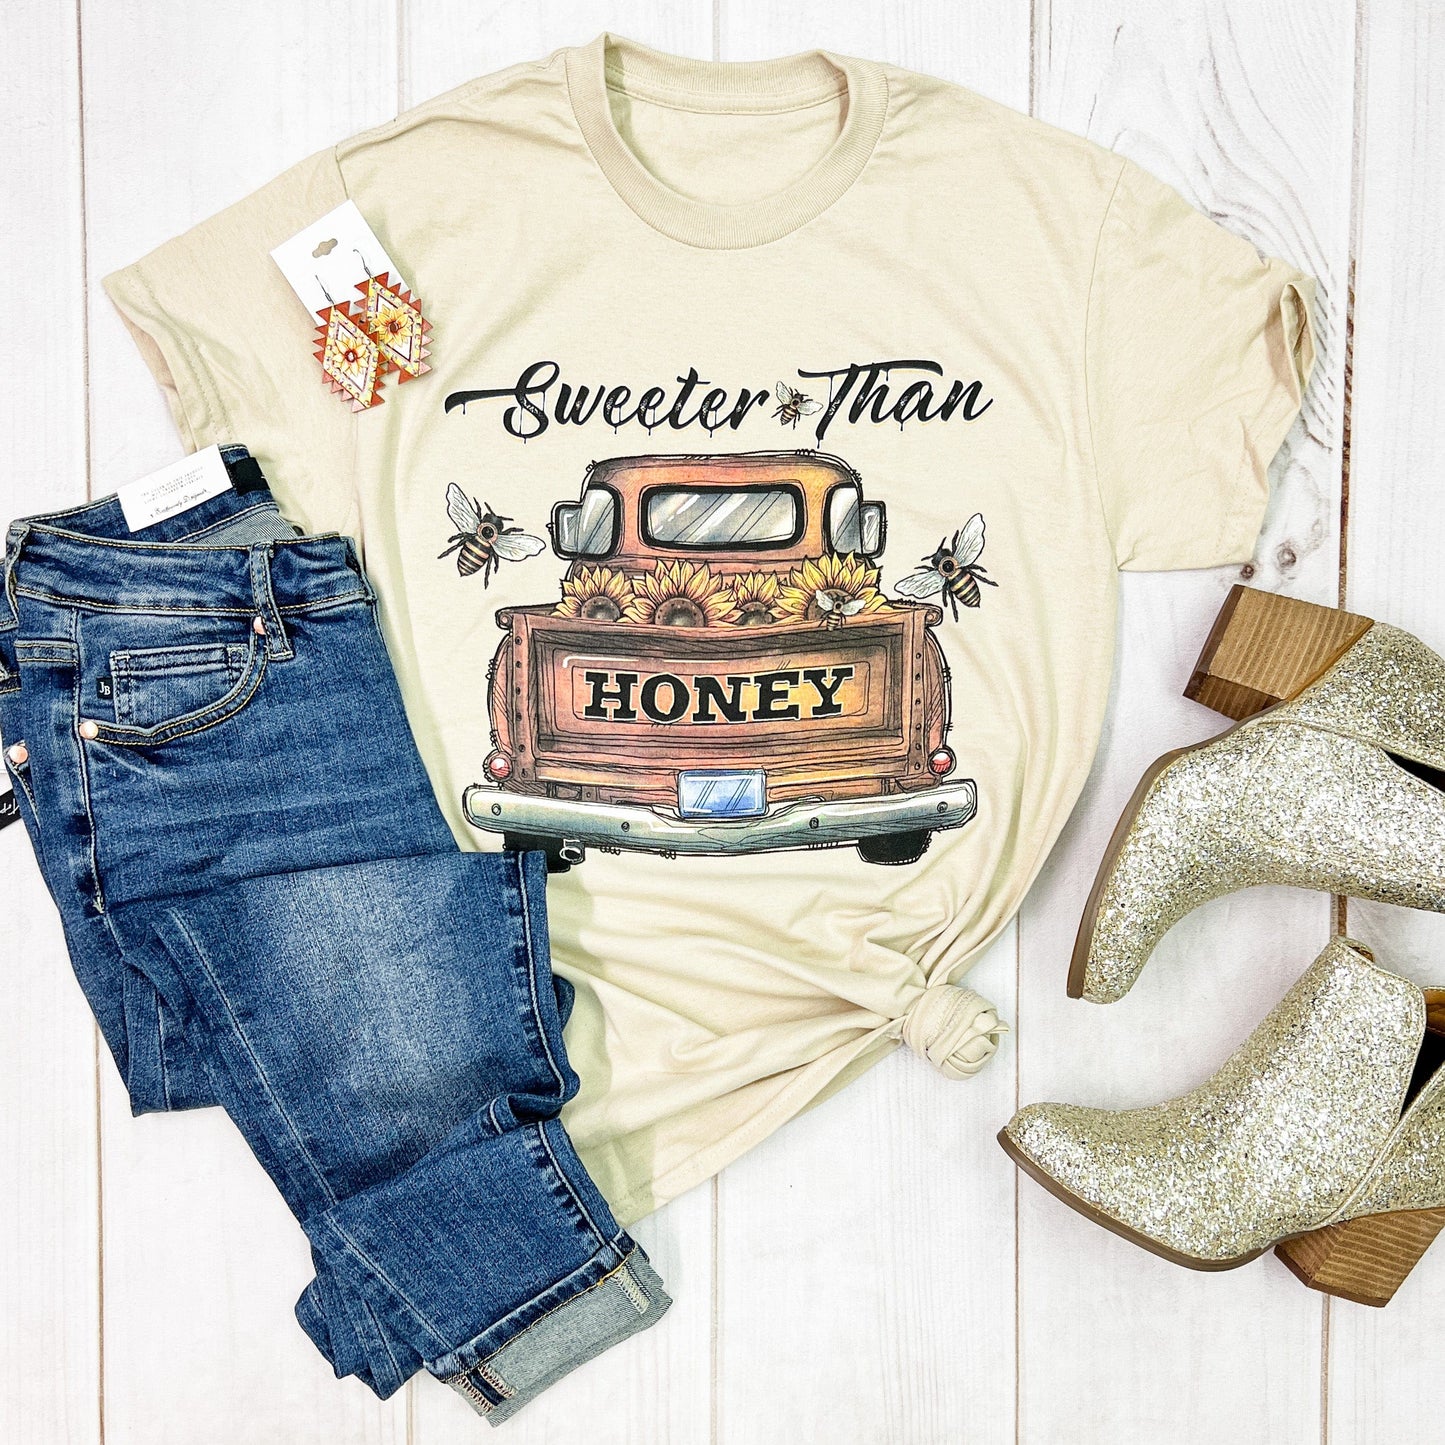 Envy Stylz Boutique Women - Apparel - Shirts - T-Shirts Sweeter Than Honey Graphic Tee